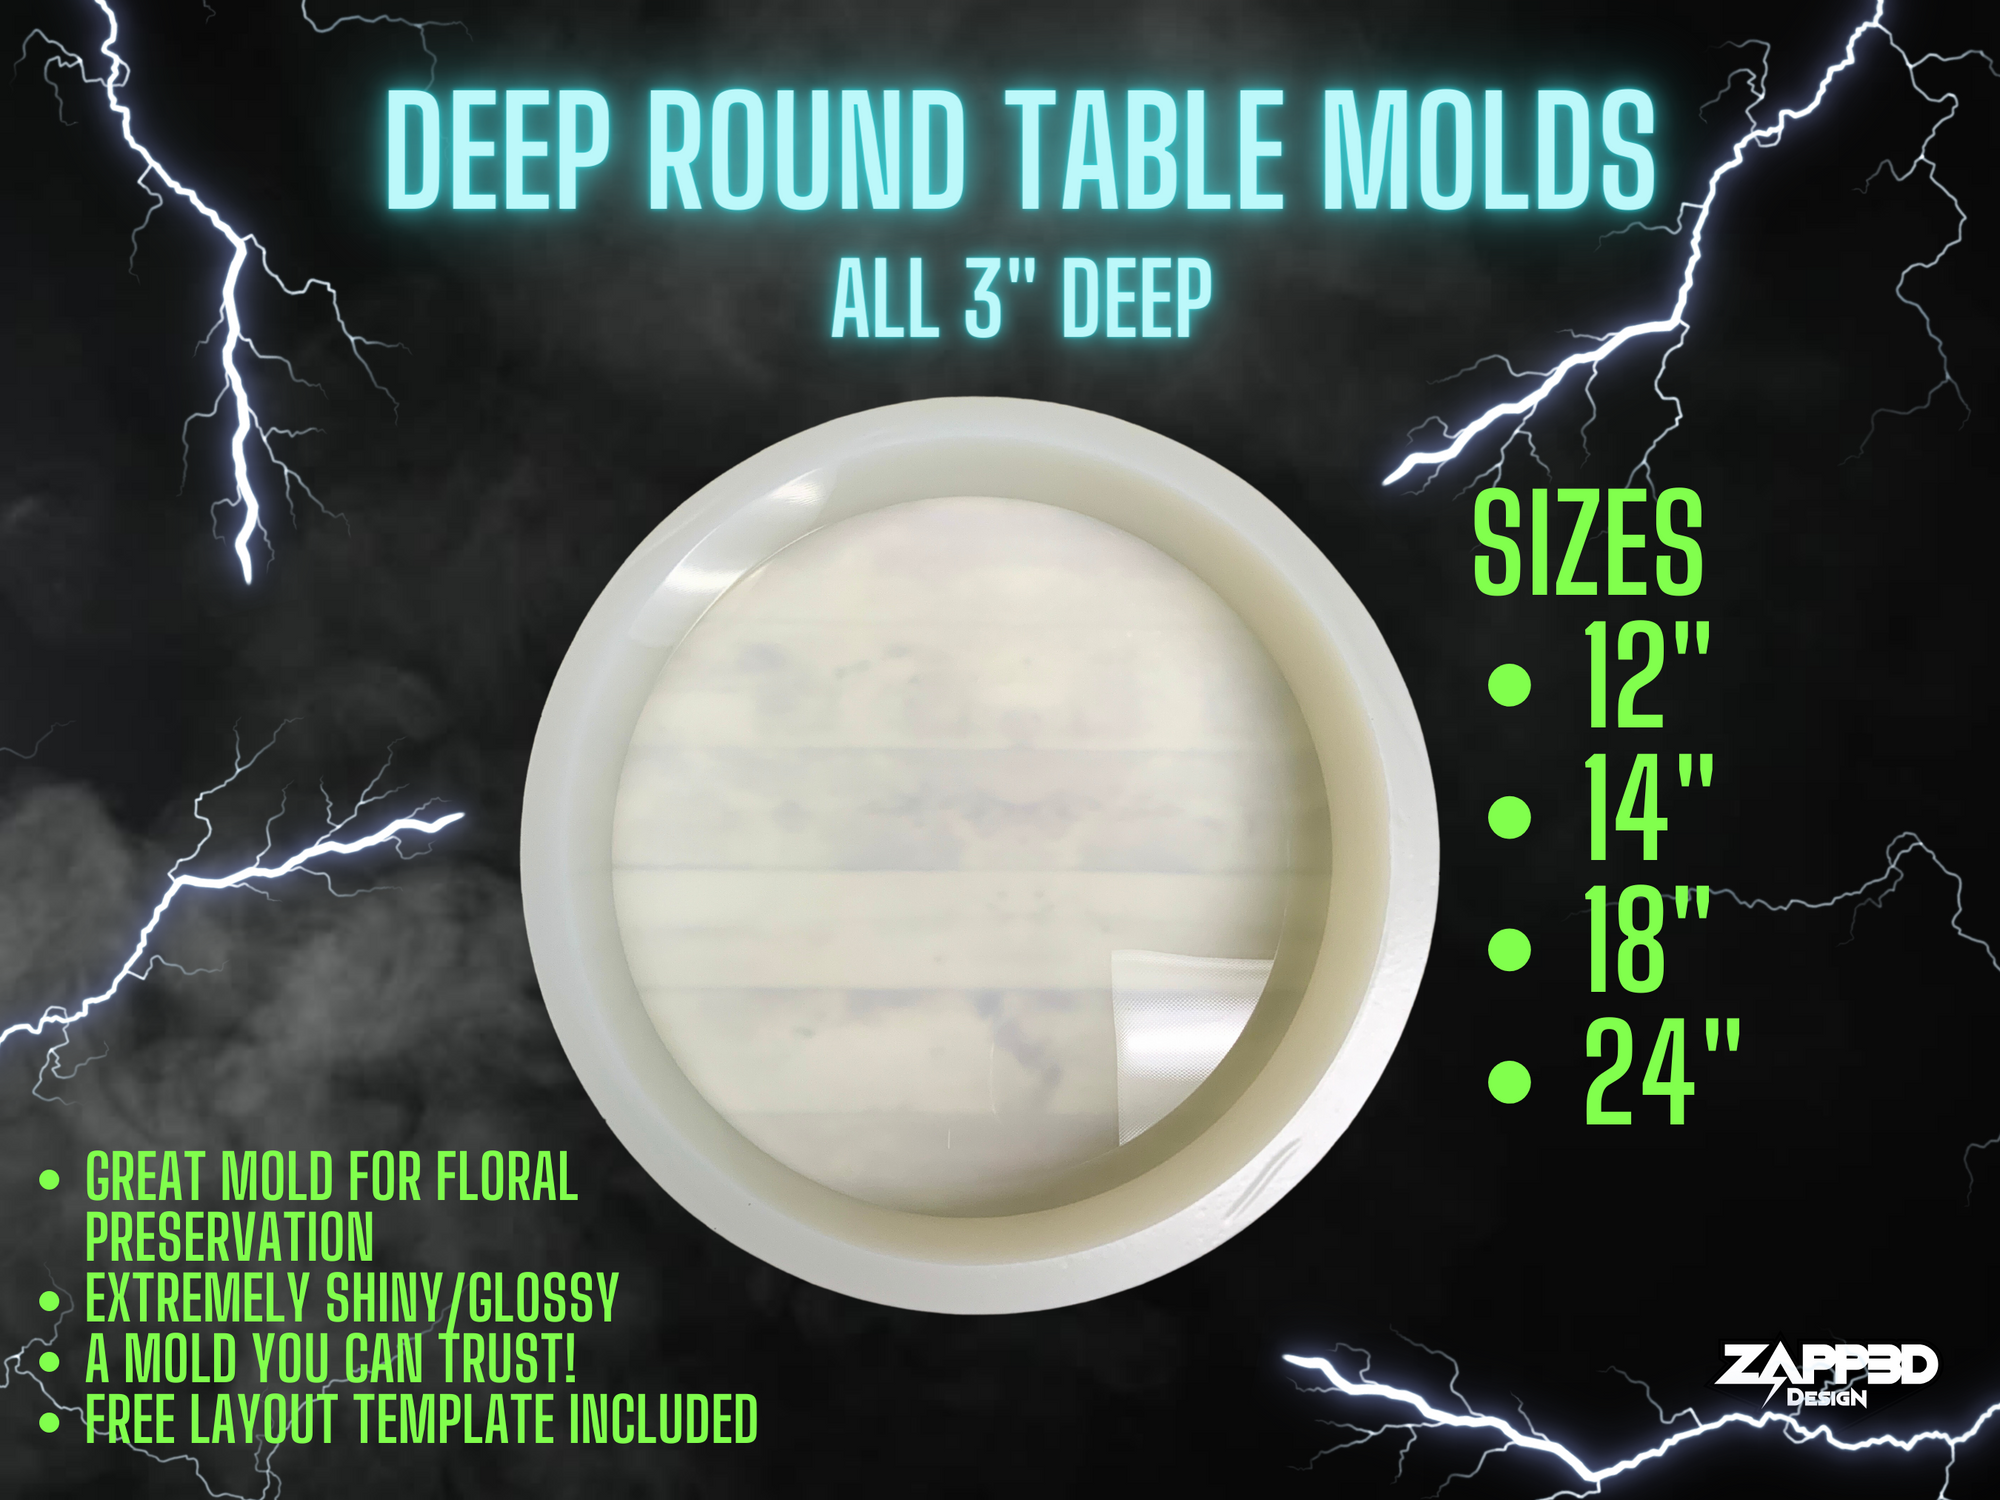 Deep Round Mold | 4 Sizes | ULTRA QUALITY | Table Mold, Round Mold, Floral Preservation Mold, Deep Circle Mold, Deep Round Table Mold